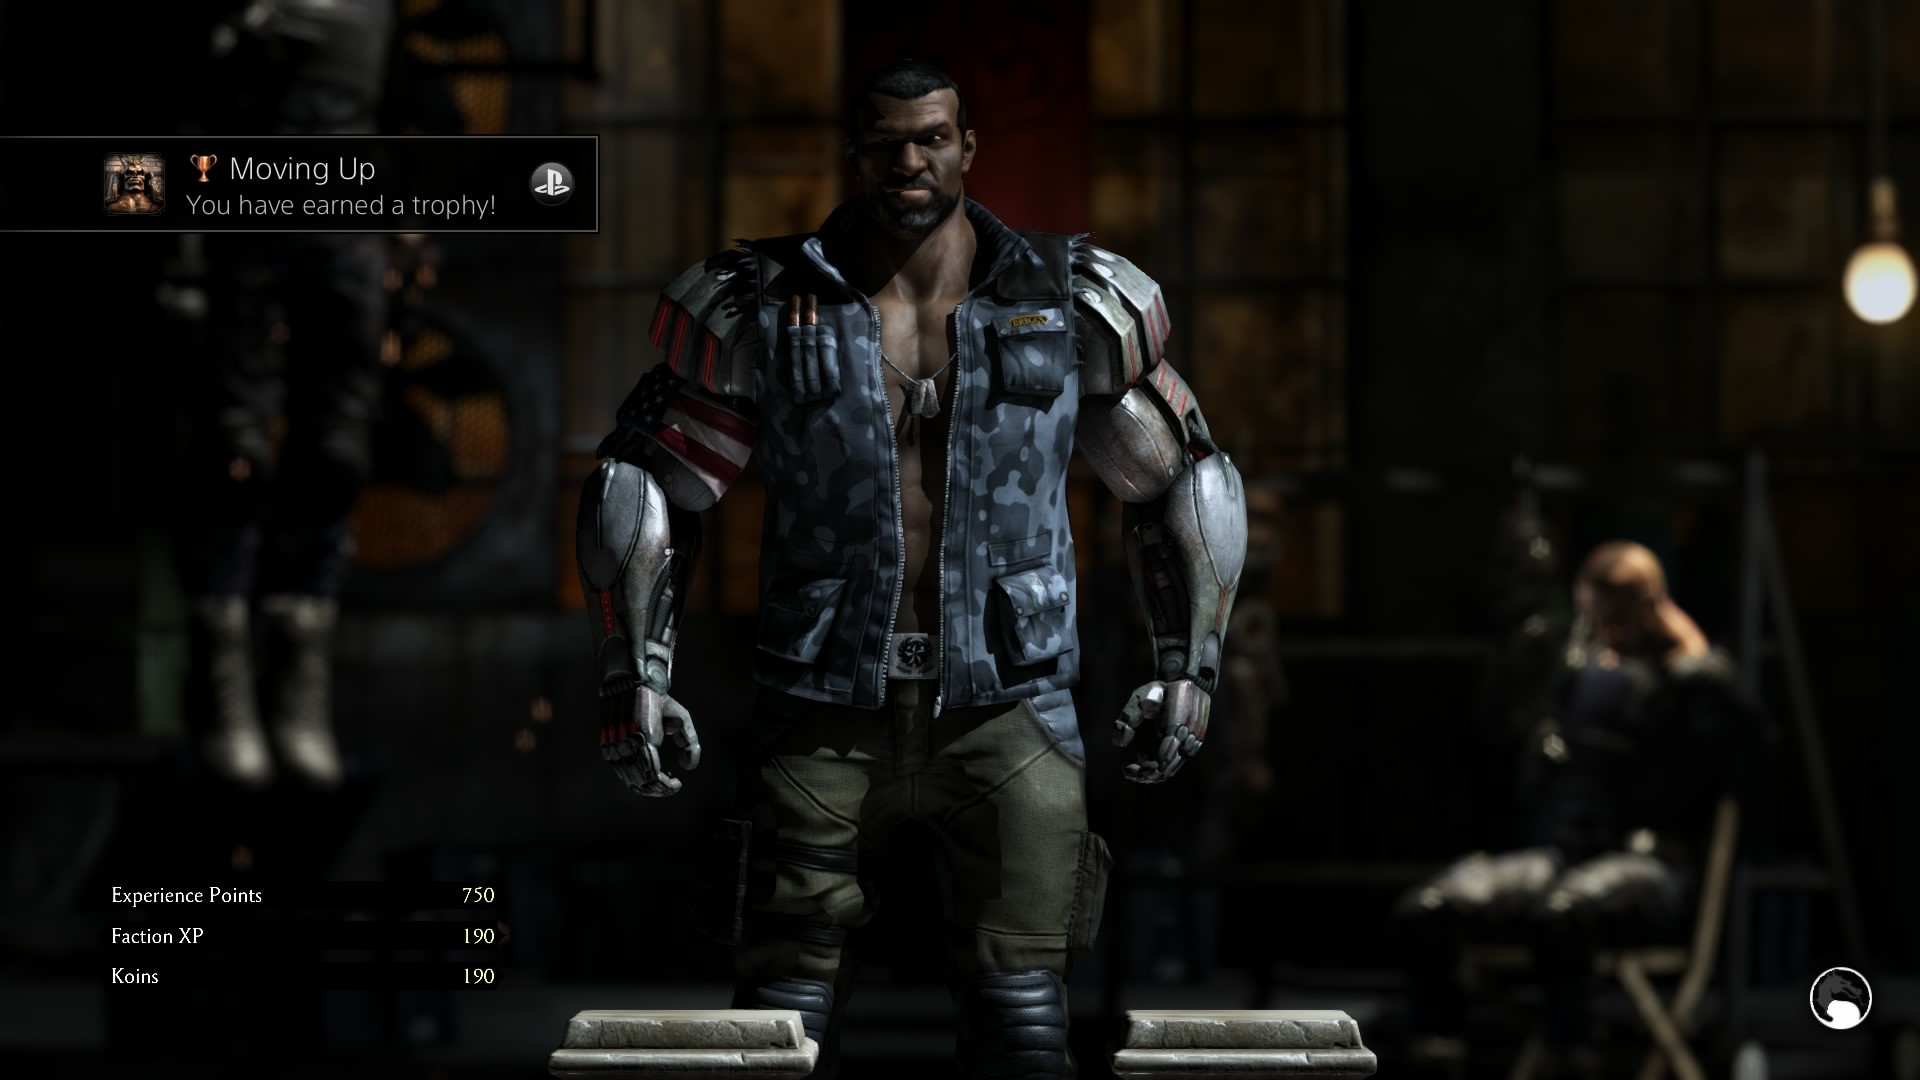 As much as I like the way MKX looks, it seems like some version of